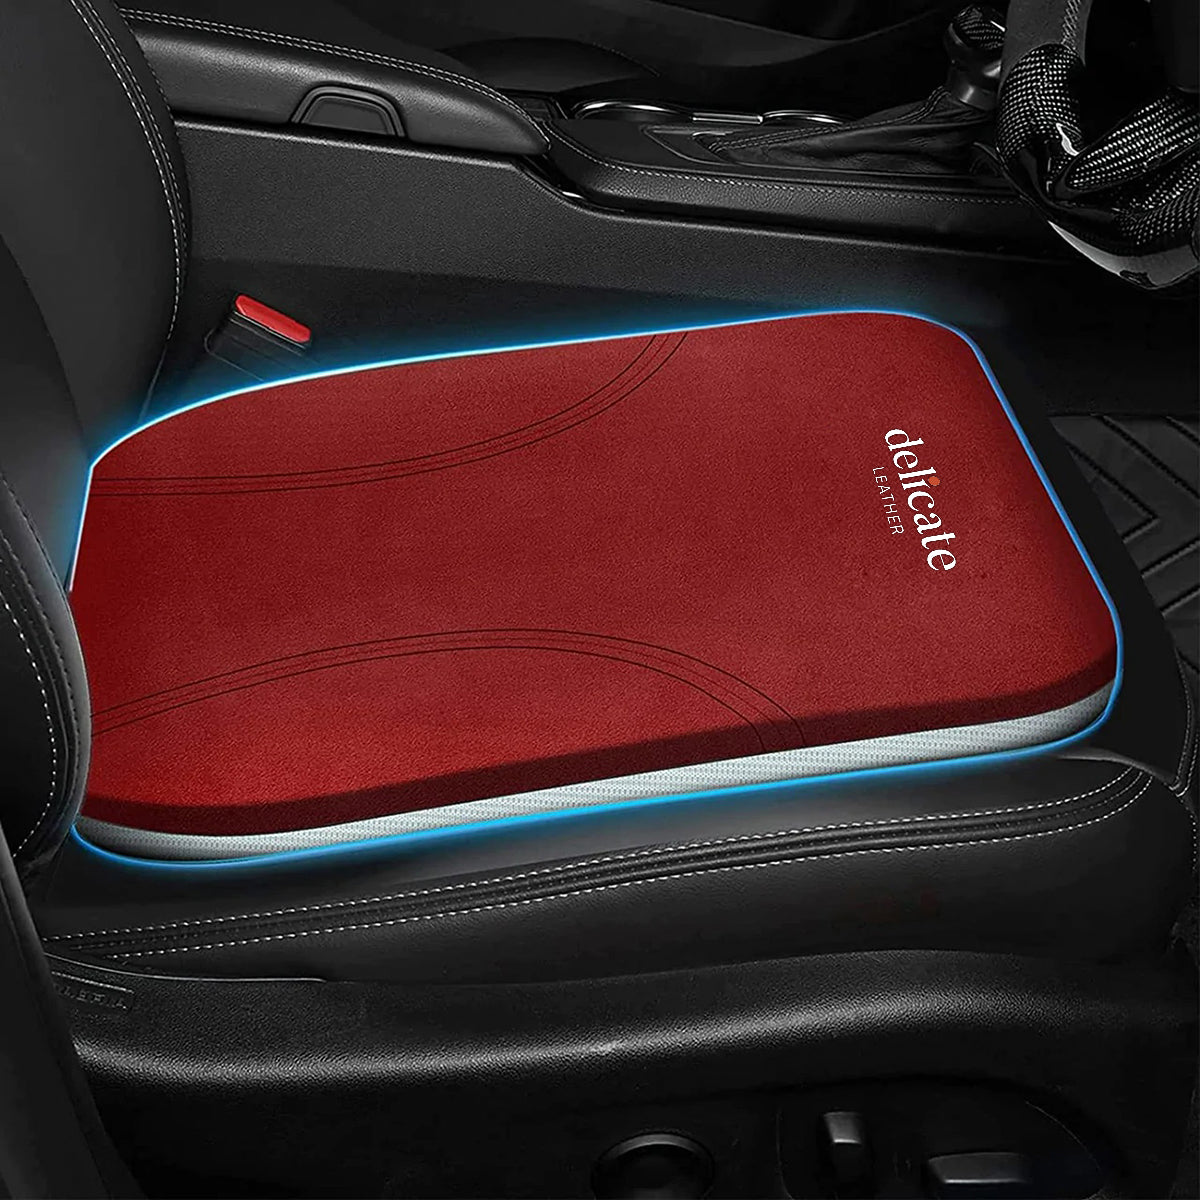 Jaguar Car Seat Cushion: Enhance Comfort and Support for Your Drive